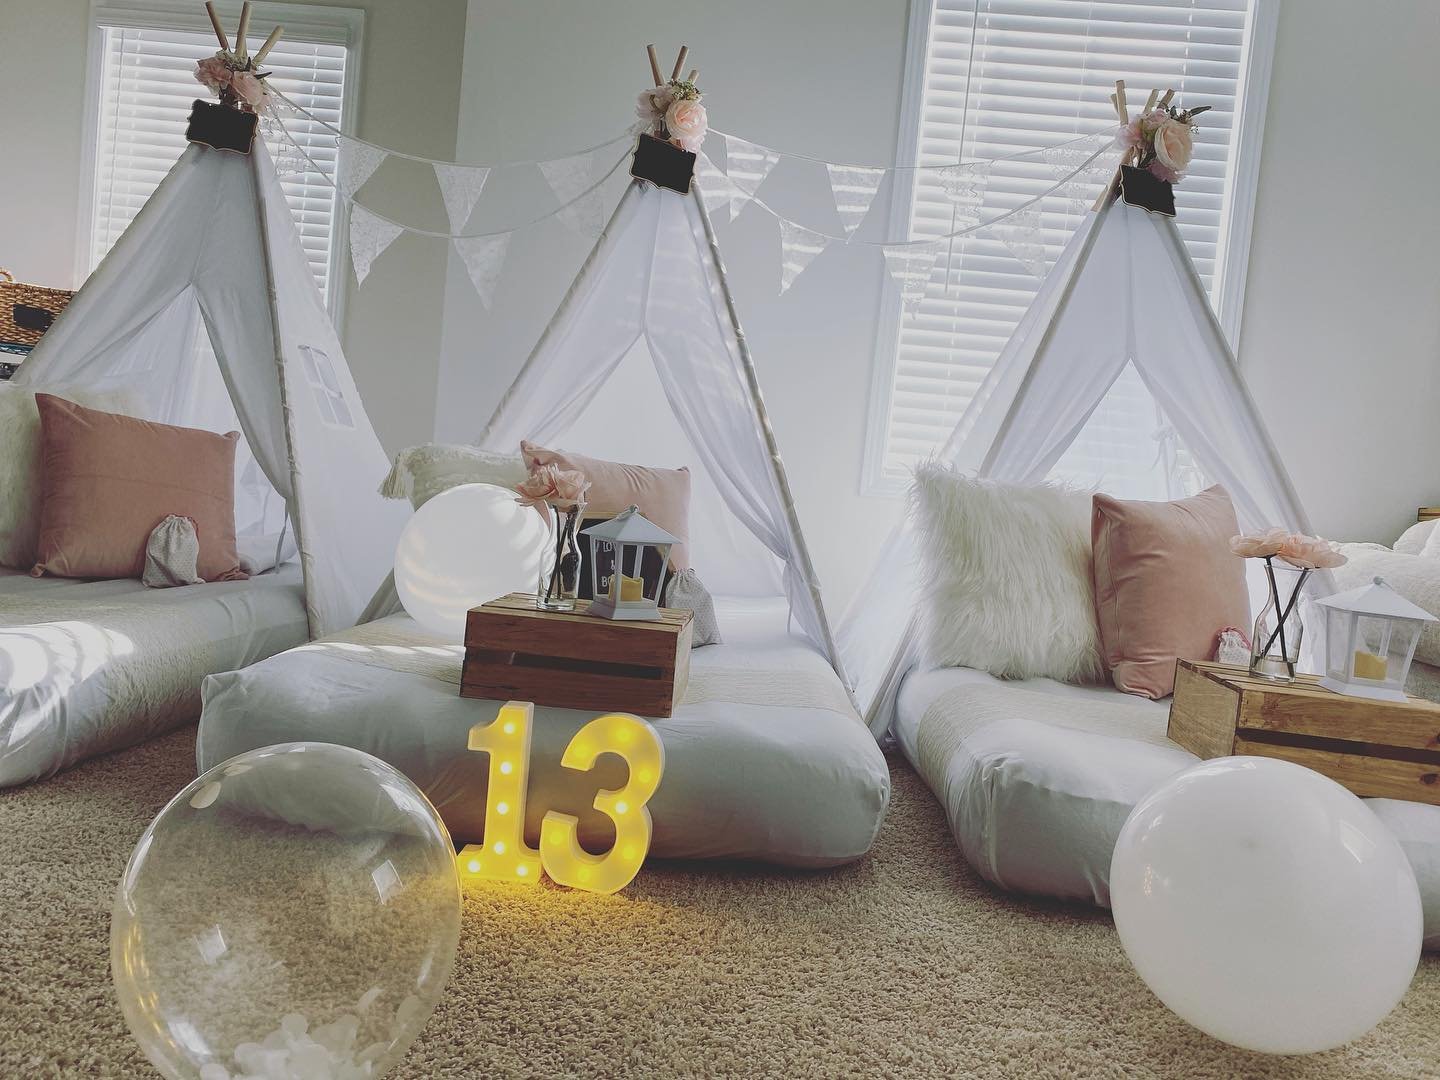 Dream House Sleepovers - Slumber Party Tent Rentals in South Carolina